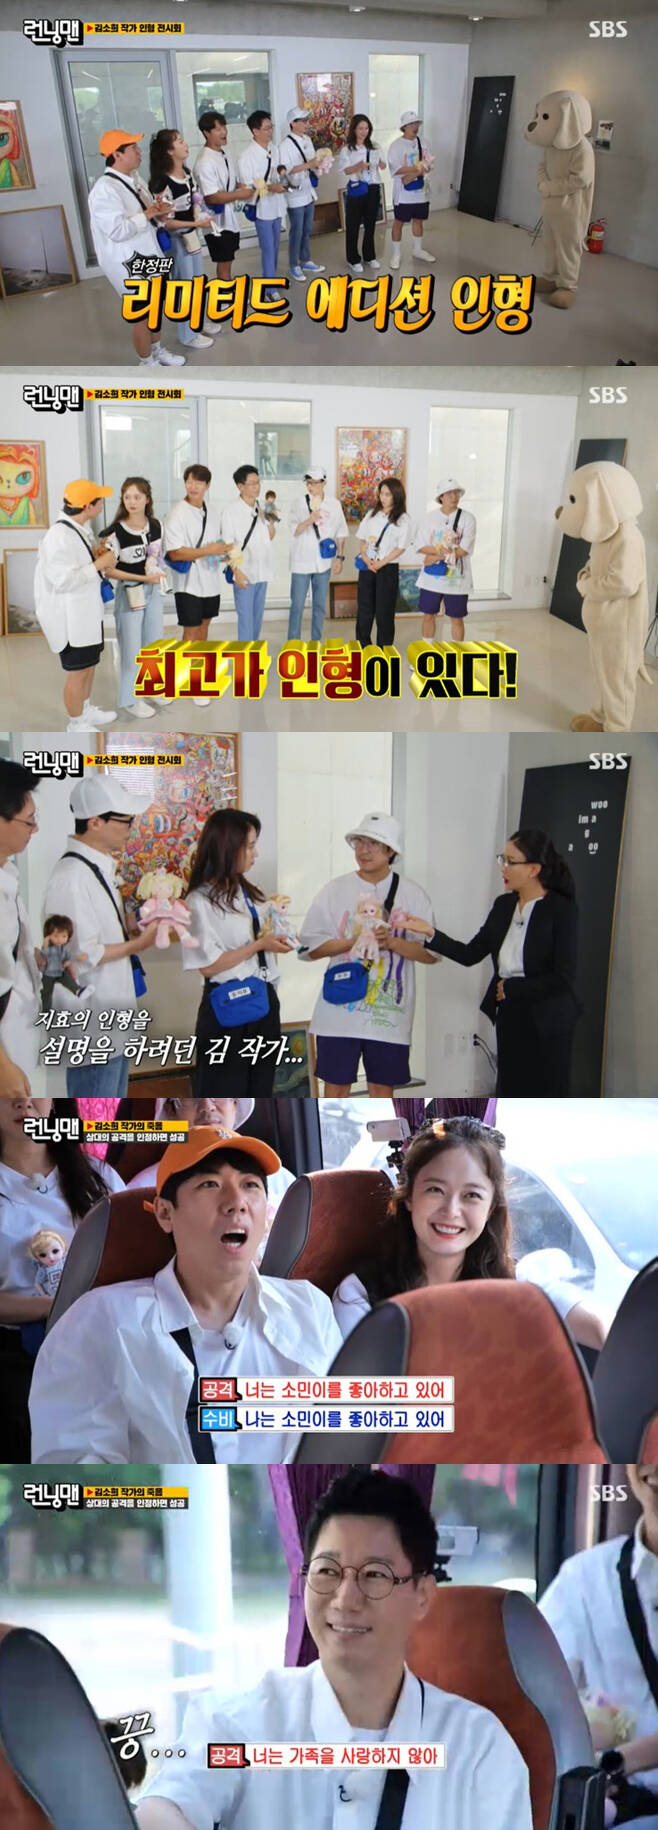 Members of Running Man also acknowledged this to Disclosure indiscriminately for Game.On the 29th SBS entertainment program Running Man, members of Kim So Hee artist Doll exhibition were included.Members invited to the exhibition by Kim So Hee writers each picked one Doll; one of the Dolls the members picked was the best Doll.Kim So Hee writer explains Doll, died after suddenly falling down after seeing Song Ji-hyos No.5 DollKim So Hees will, which was released after his death, included a statement saying that he would give the highest price of Doll to those who passed the qualification test.The first quality test was ranked first by Yoo Jae-Suk.Later members moved in a car for Kim So Hees alma mater tour; the order of getting off was important because they could get hints quickly if they got off first.The game proposed by the PD is I have to admit. When the opponent says You are now ~, you can repeat it.Yoo Jae-Suk told Kim Jong-kook, You are thinking of grace, and Kim Jong-kook said, Stop.Haha told Song Ji-hyo, Youve dated Kim Jong-kook before, and Song Ji-hyo admitted.The members laughed, saying, I knew it. Then Song Ji-hyo laughed at Haha, saying, You are still thinking about me.Haha attacked Song Ji-hyo again, saying, You were at Kim Jong-kooks house yesterday, and Song Ji-hyo attacked Haha with a stronger attack, You thought of me yesterday.